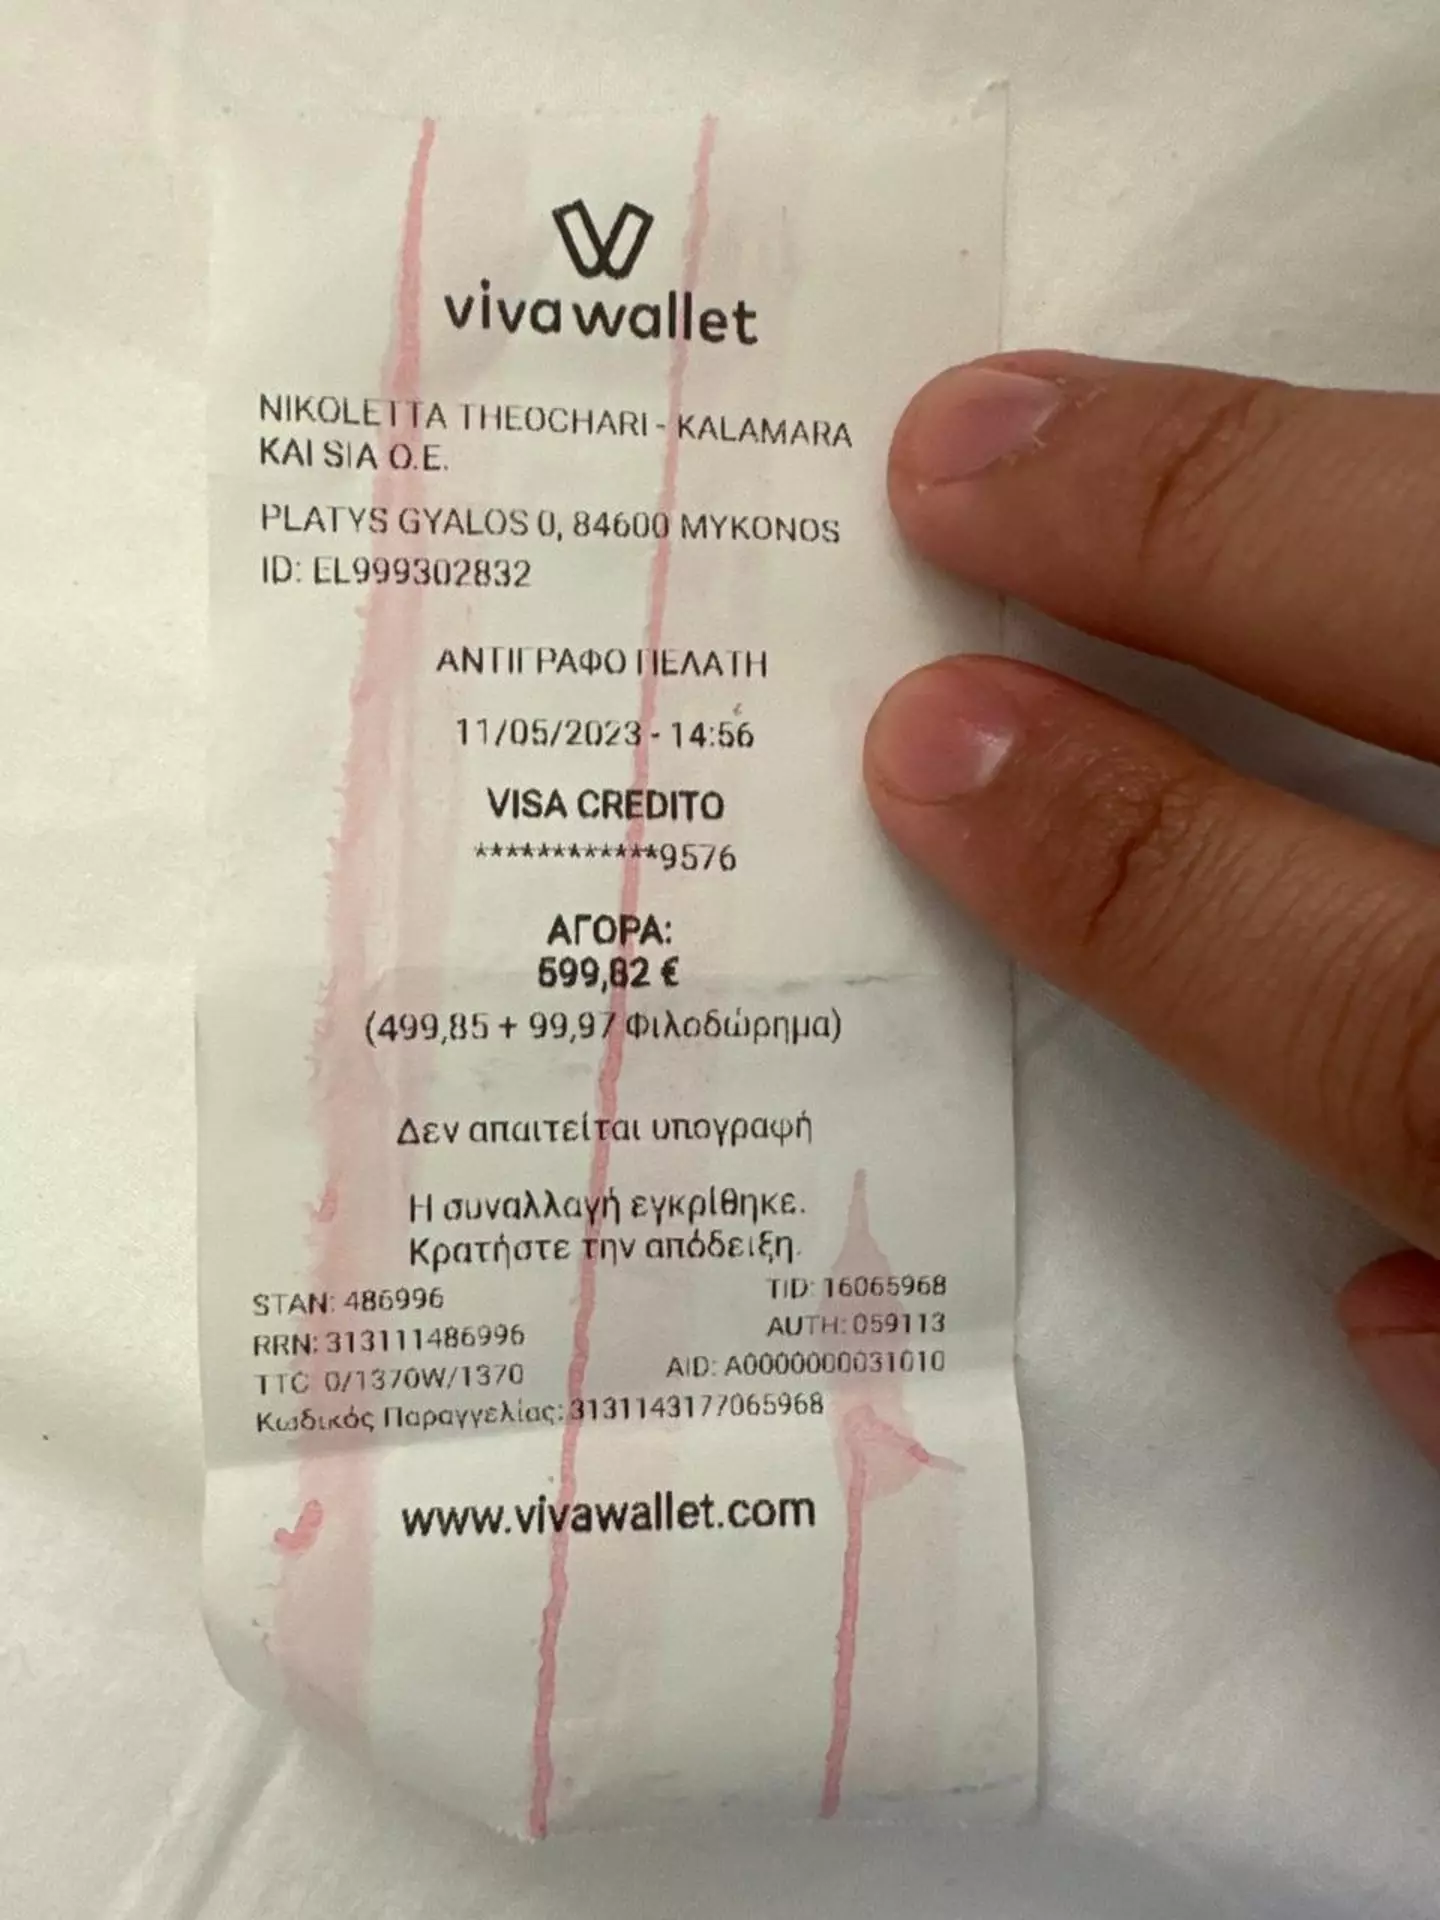 The bill from DK Oyster which the couple received. (Mirrorpix/Oscar Maldonado)